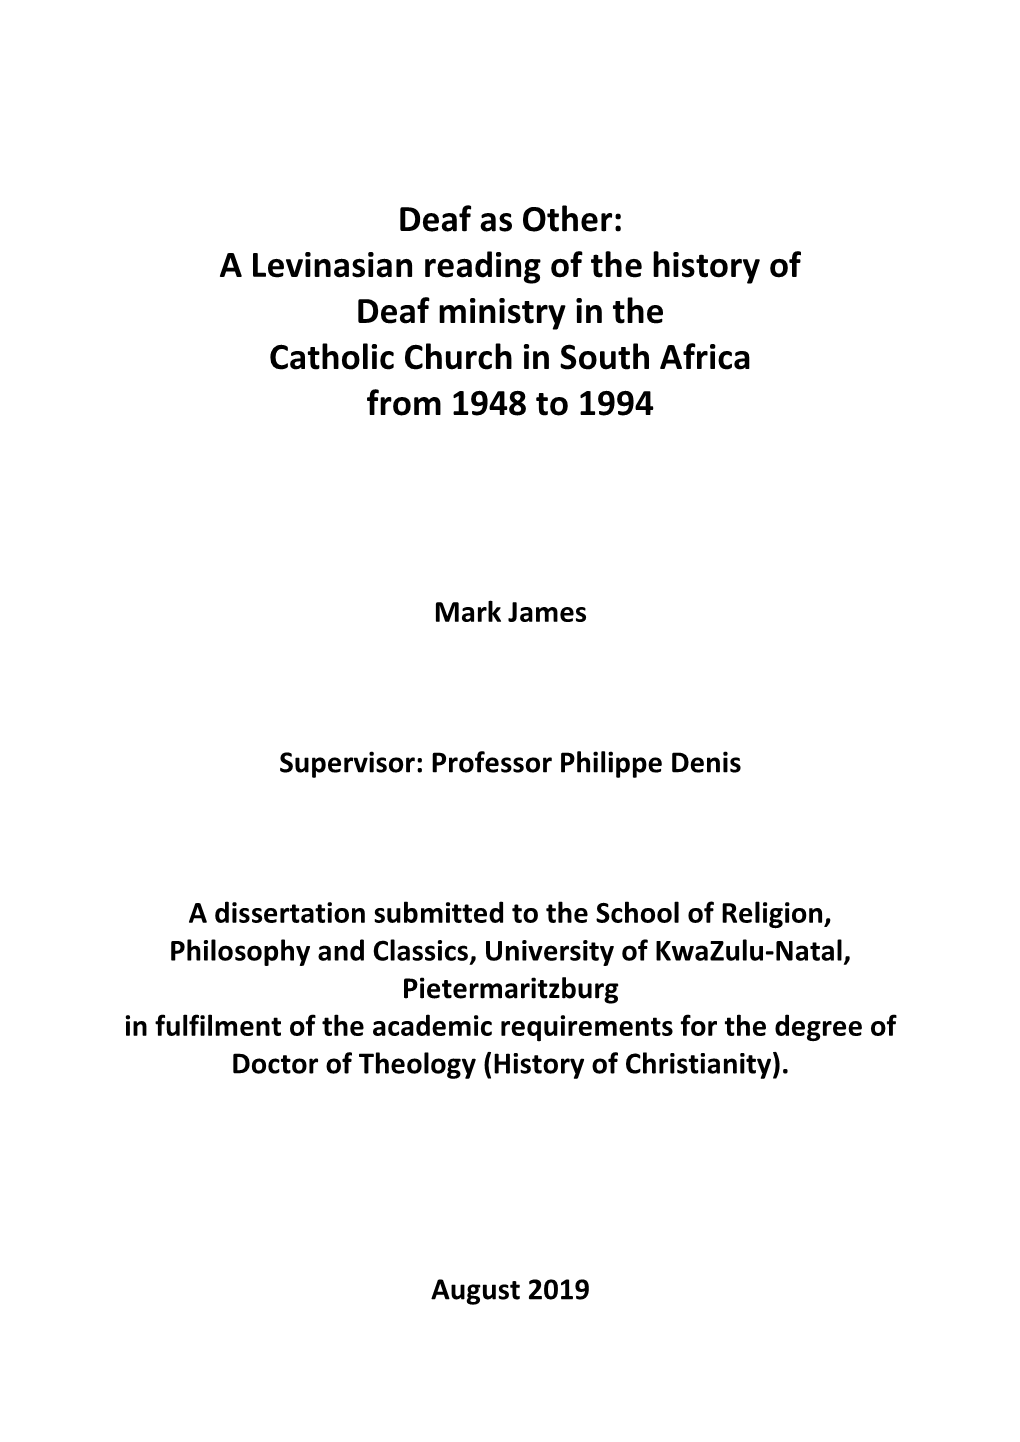 Deaf As Other: a Levinasian Reading of the History of Deaf Ministry in the Catholic Church in South Africa from 1948 to 1994